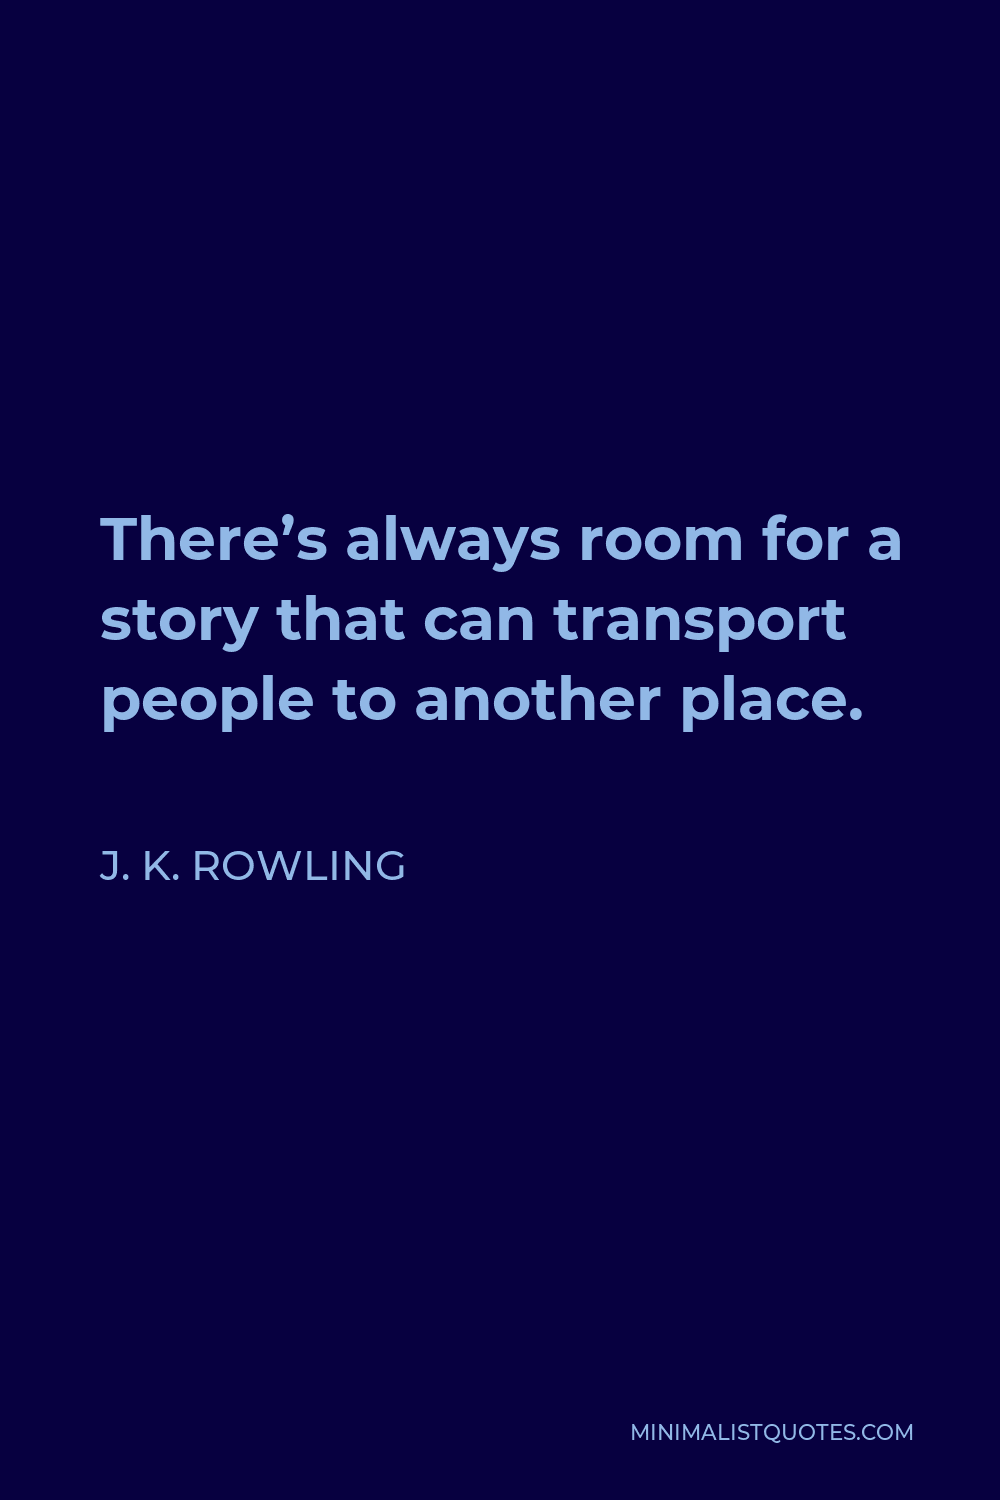 J. K. Rowling Quote - There’s always room for a story that can transport people to another place.